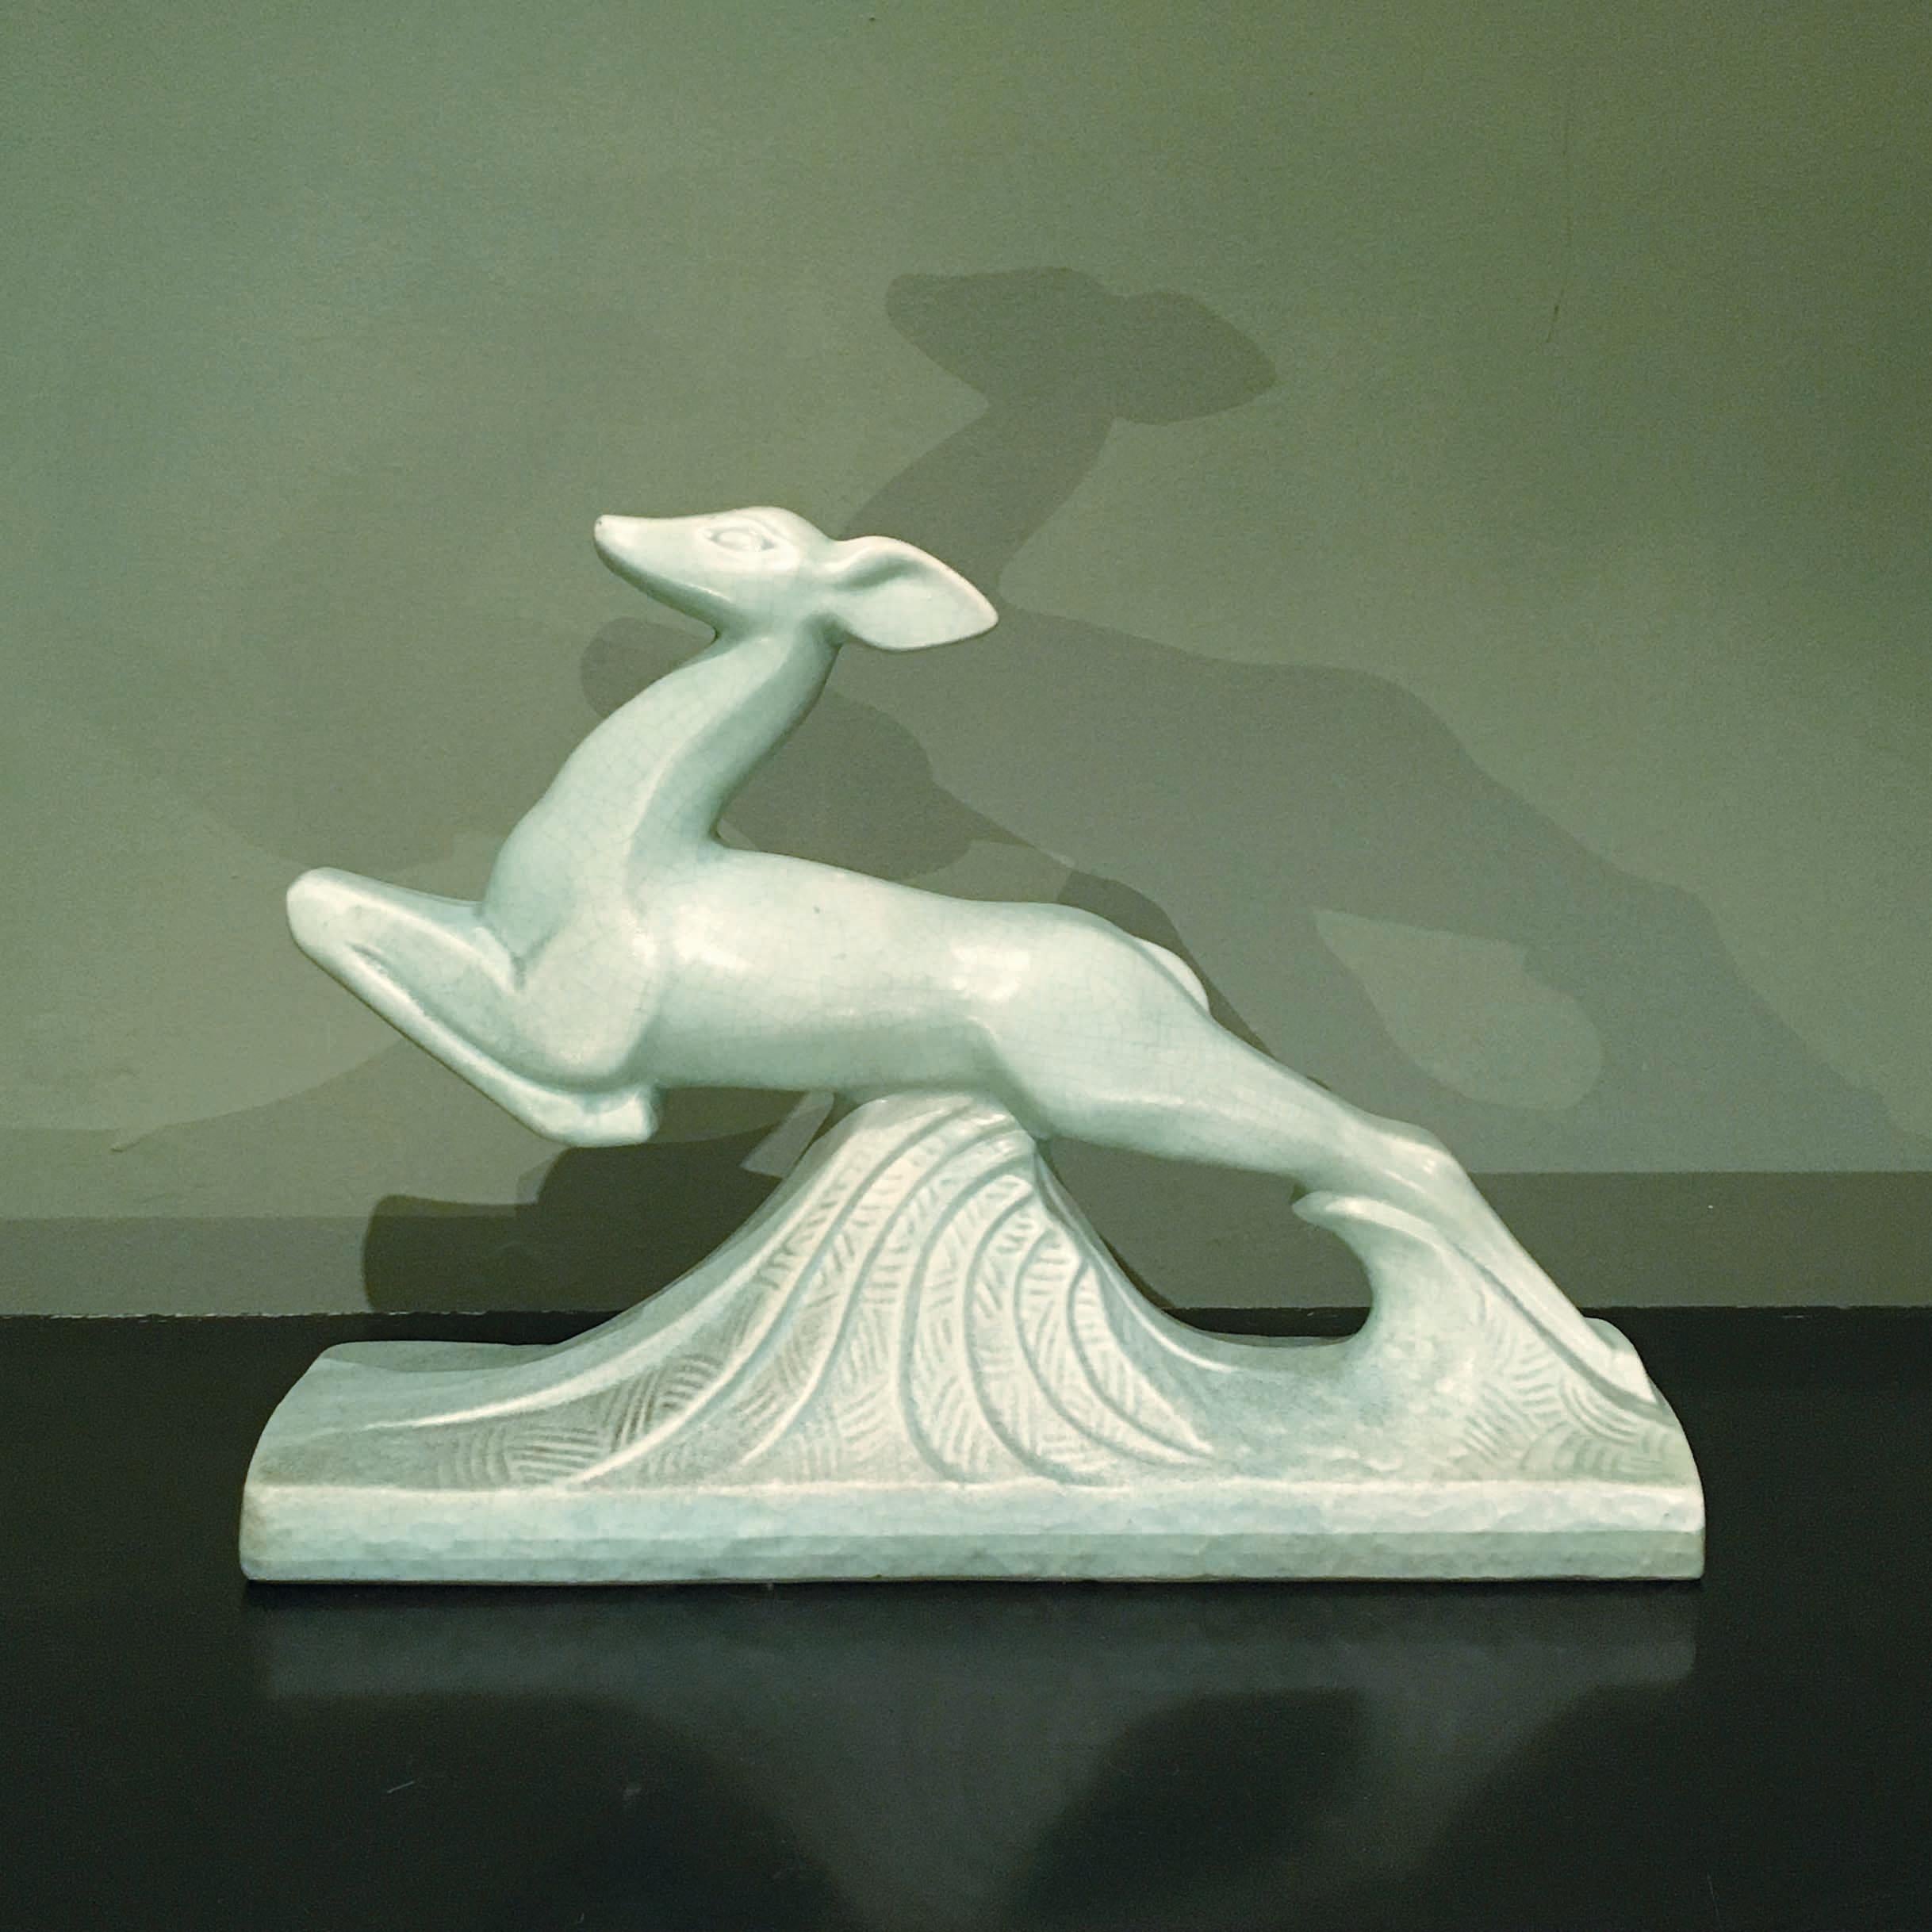 Early 20th Century Art Deco Crackle Glazed Ceramic Figure of a Jumping Antelope For Sale 1